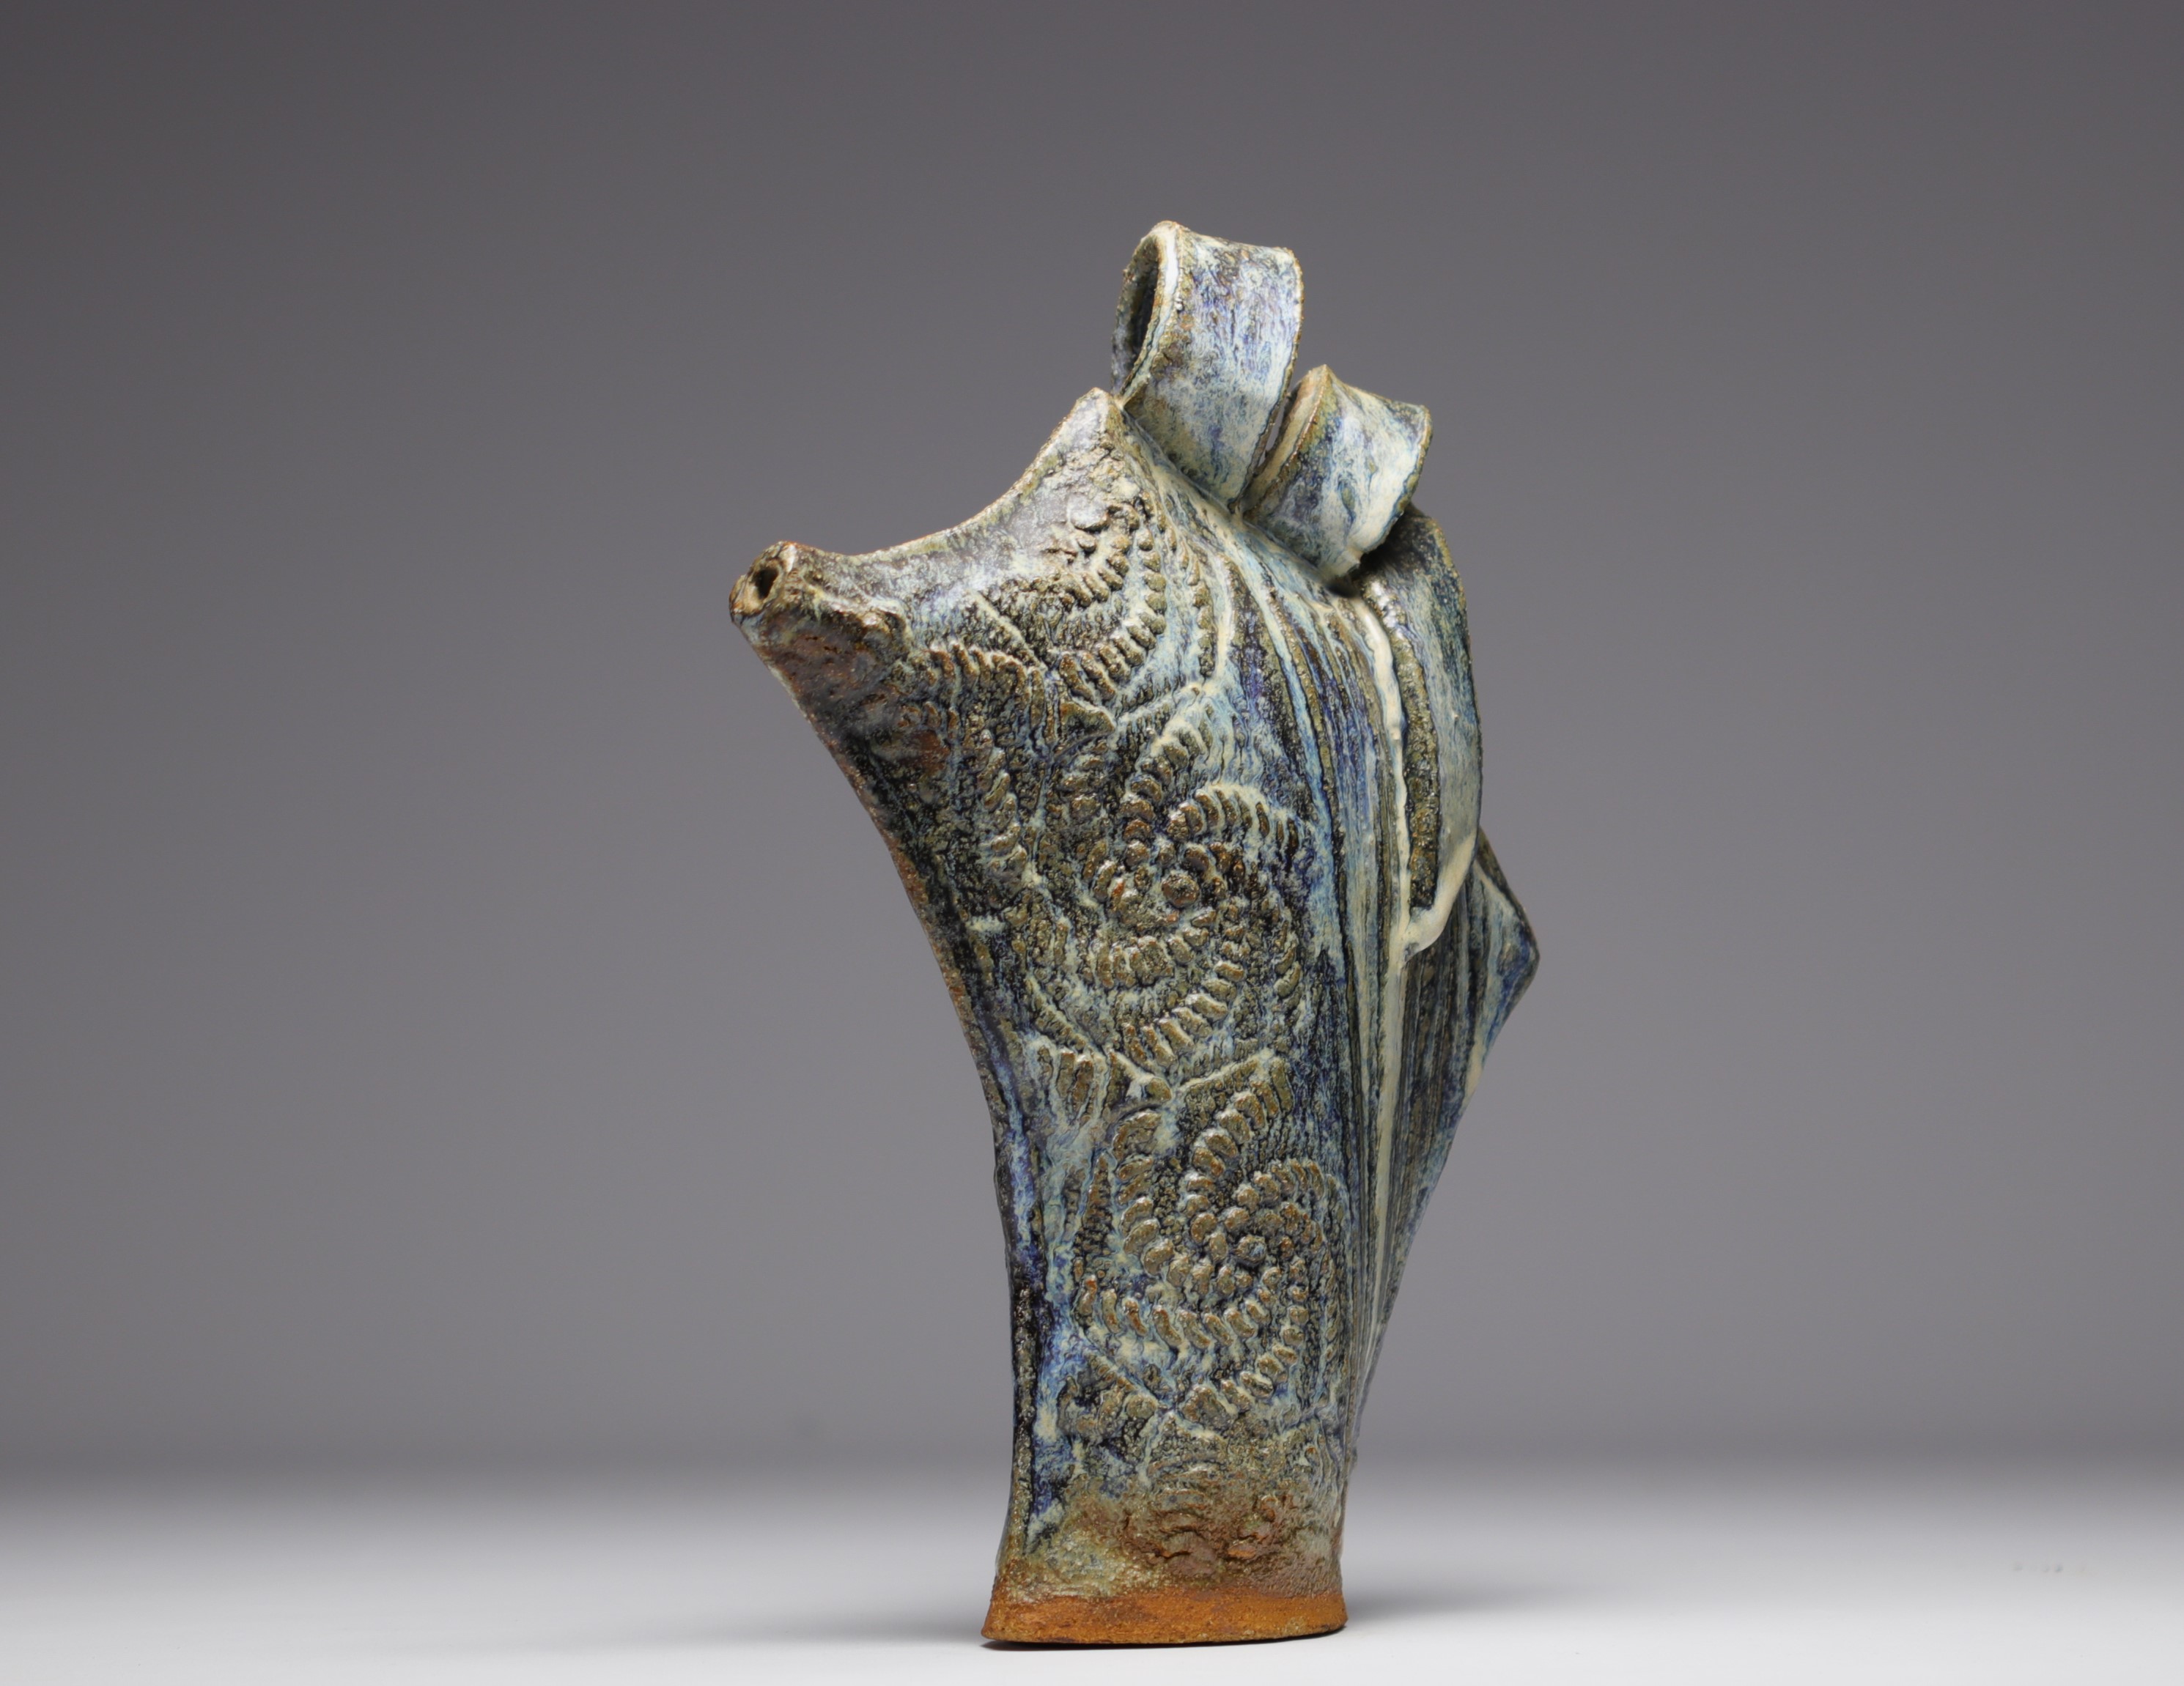 Zoomorphic sculpture in glazed terracotta, signed below the piece. - Image 3 of 5